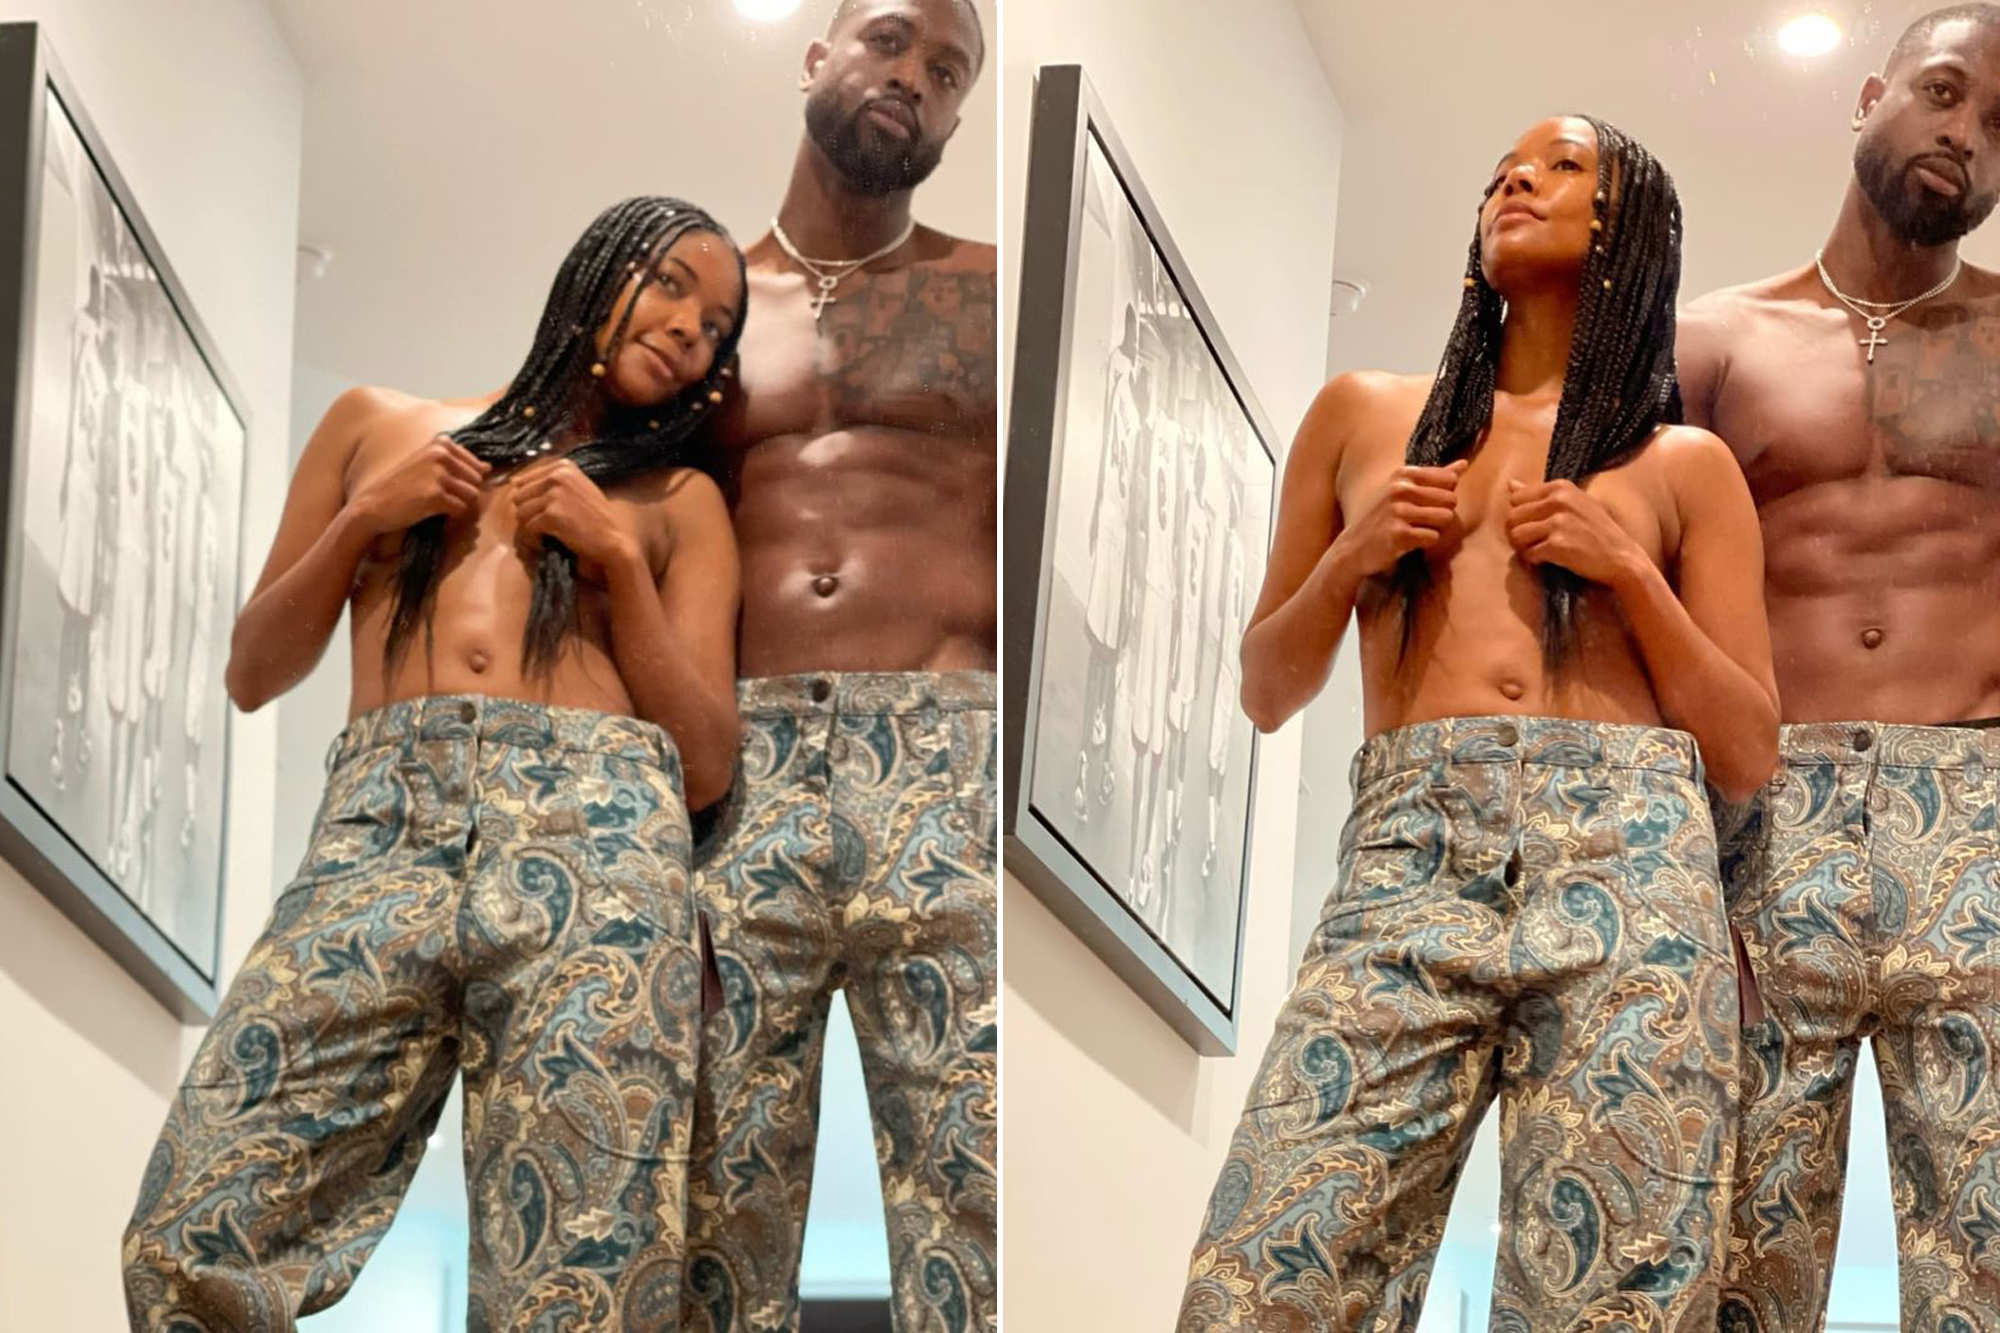 anthony renfrow recommends gabrielle unionnude pic